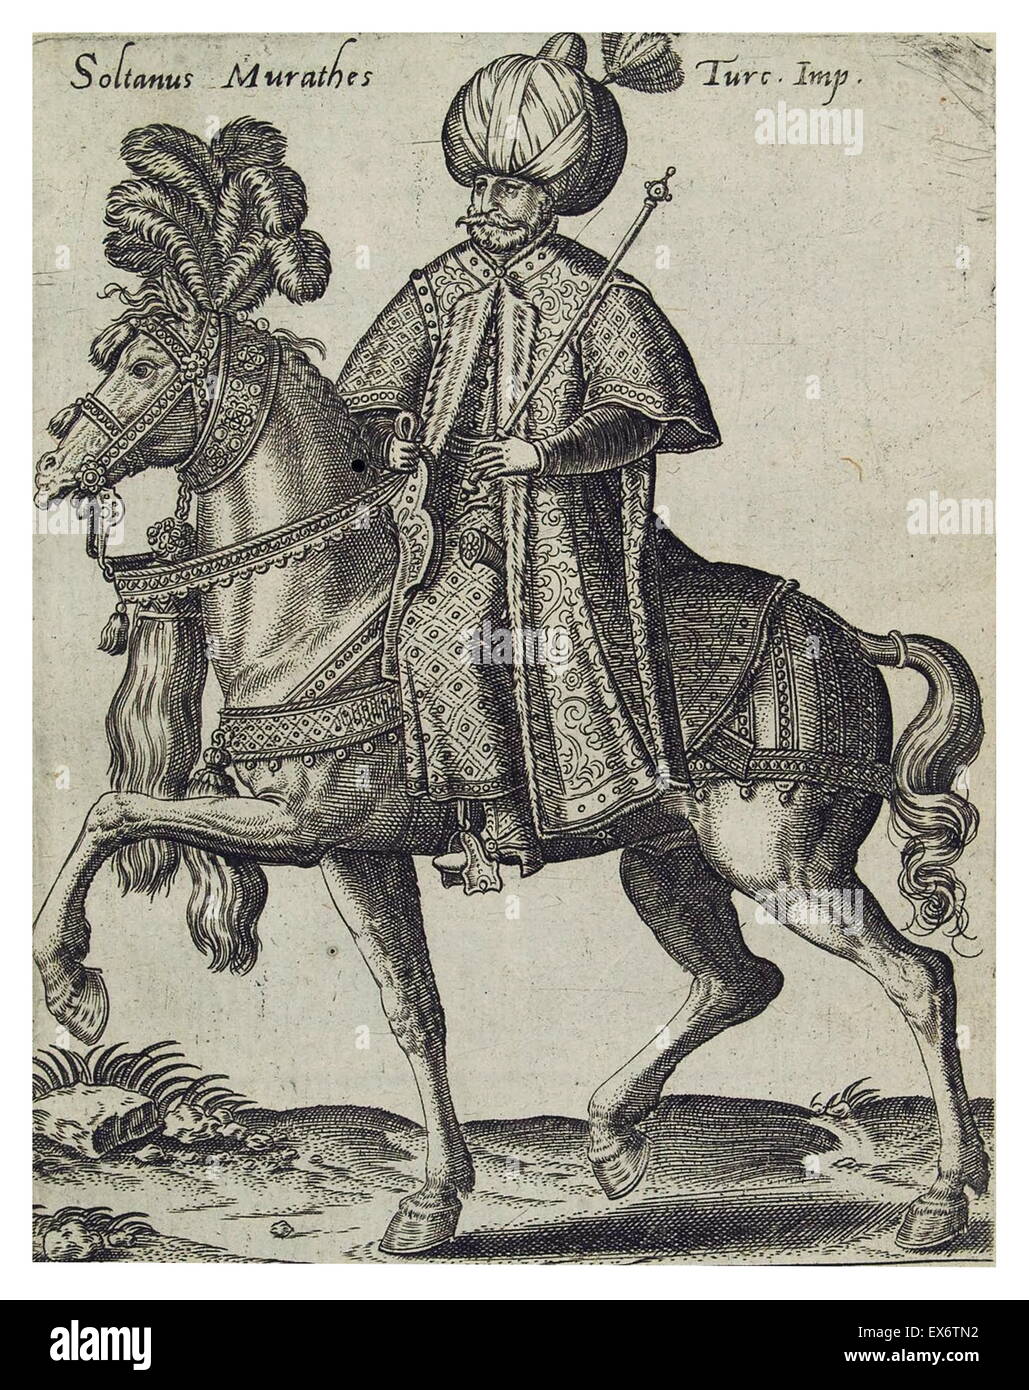 ottoman janissary 17th century. The Janissaries were Ottoman Turkish elite infantry units that formed the Ottoman Sultan's household troops and bodyguards. Stock Photo